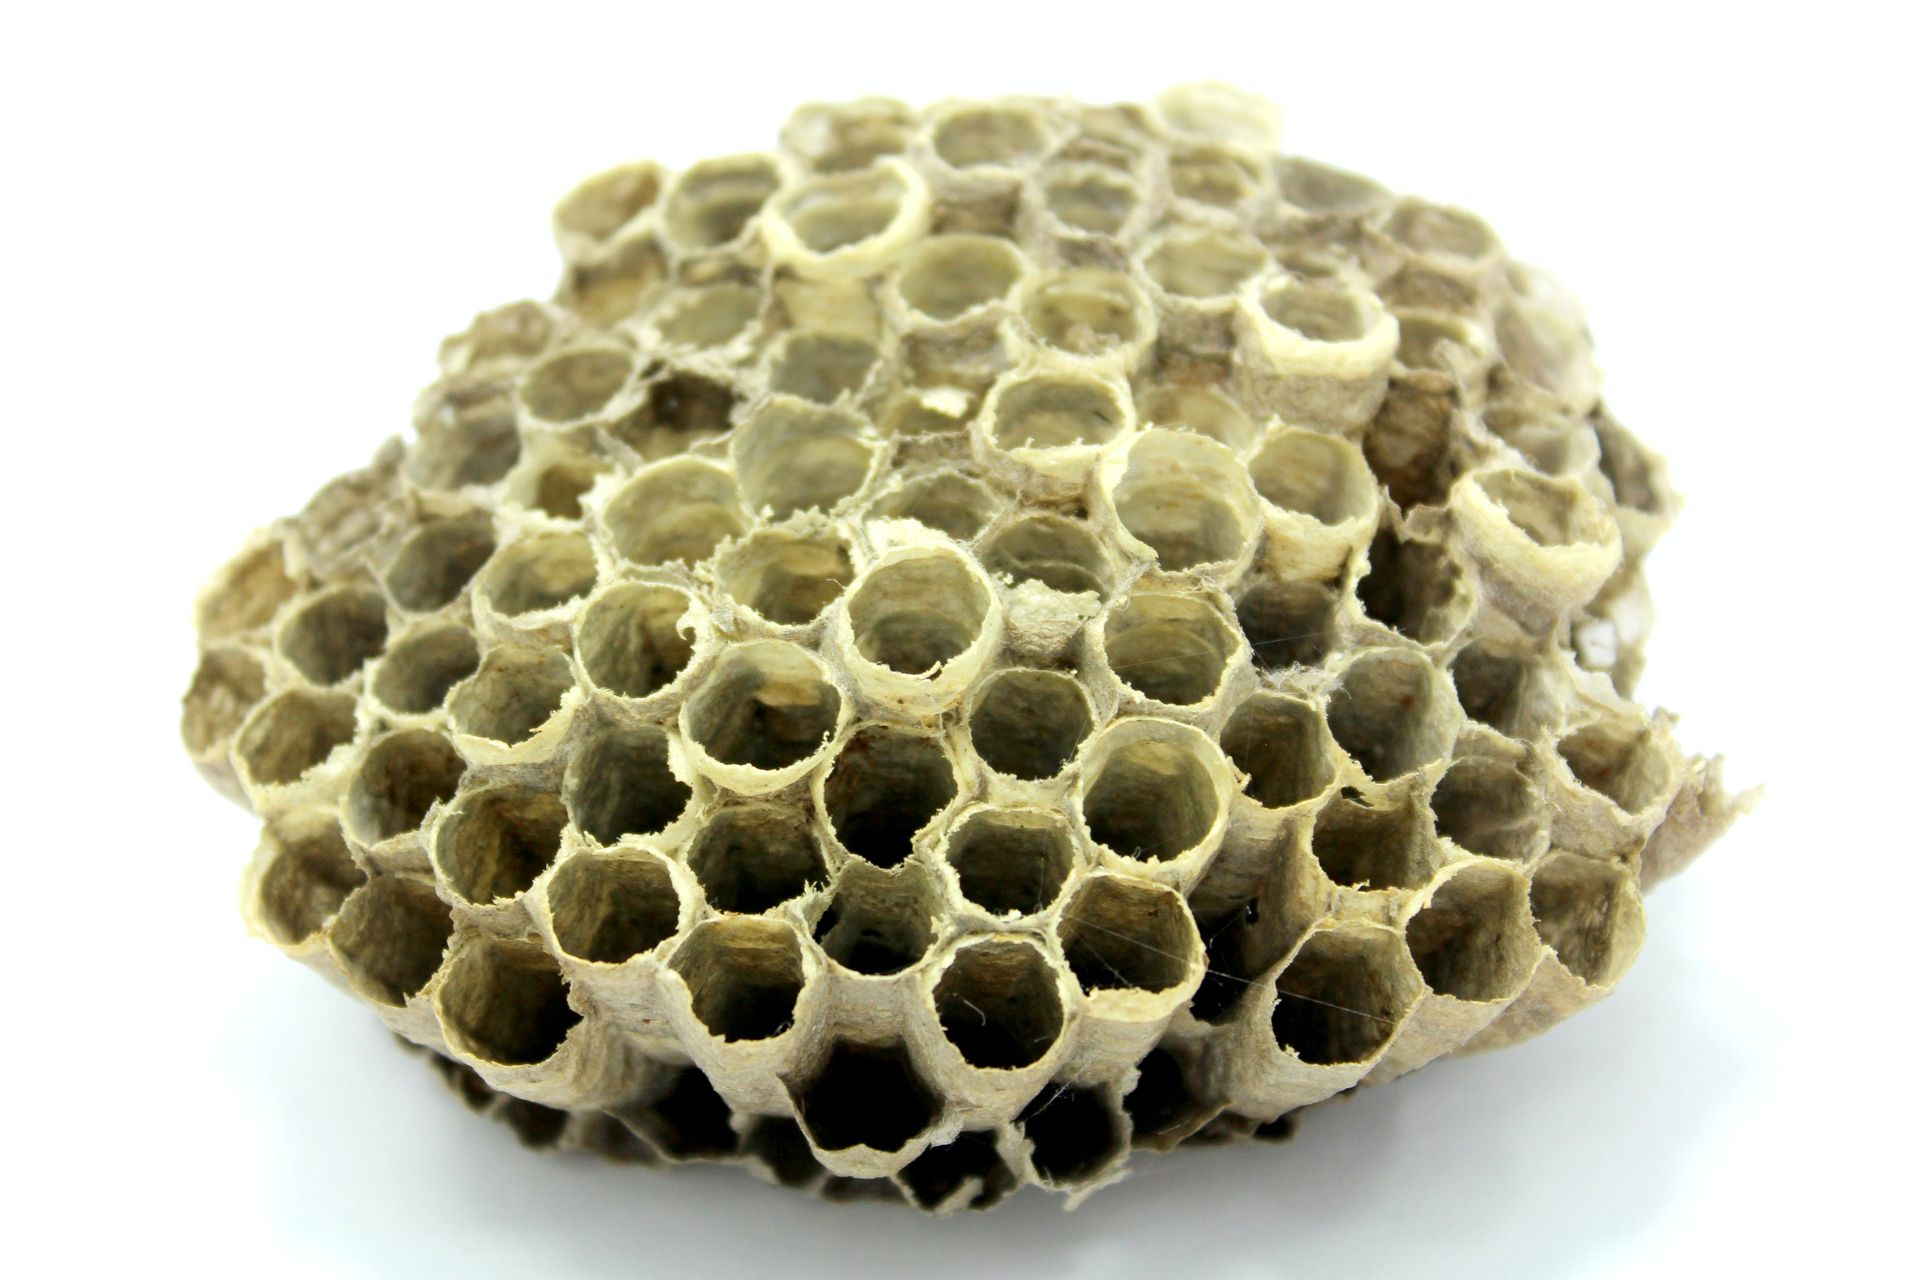 Cavity Structures Effect relating to bee hives and a relationship to transportation